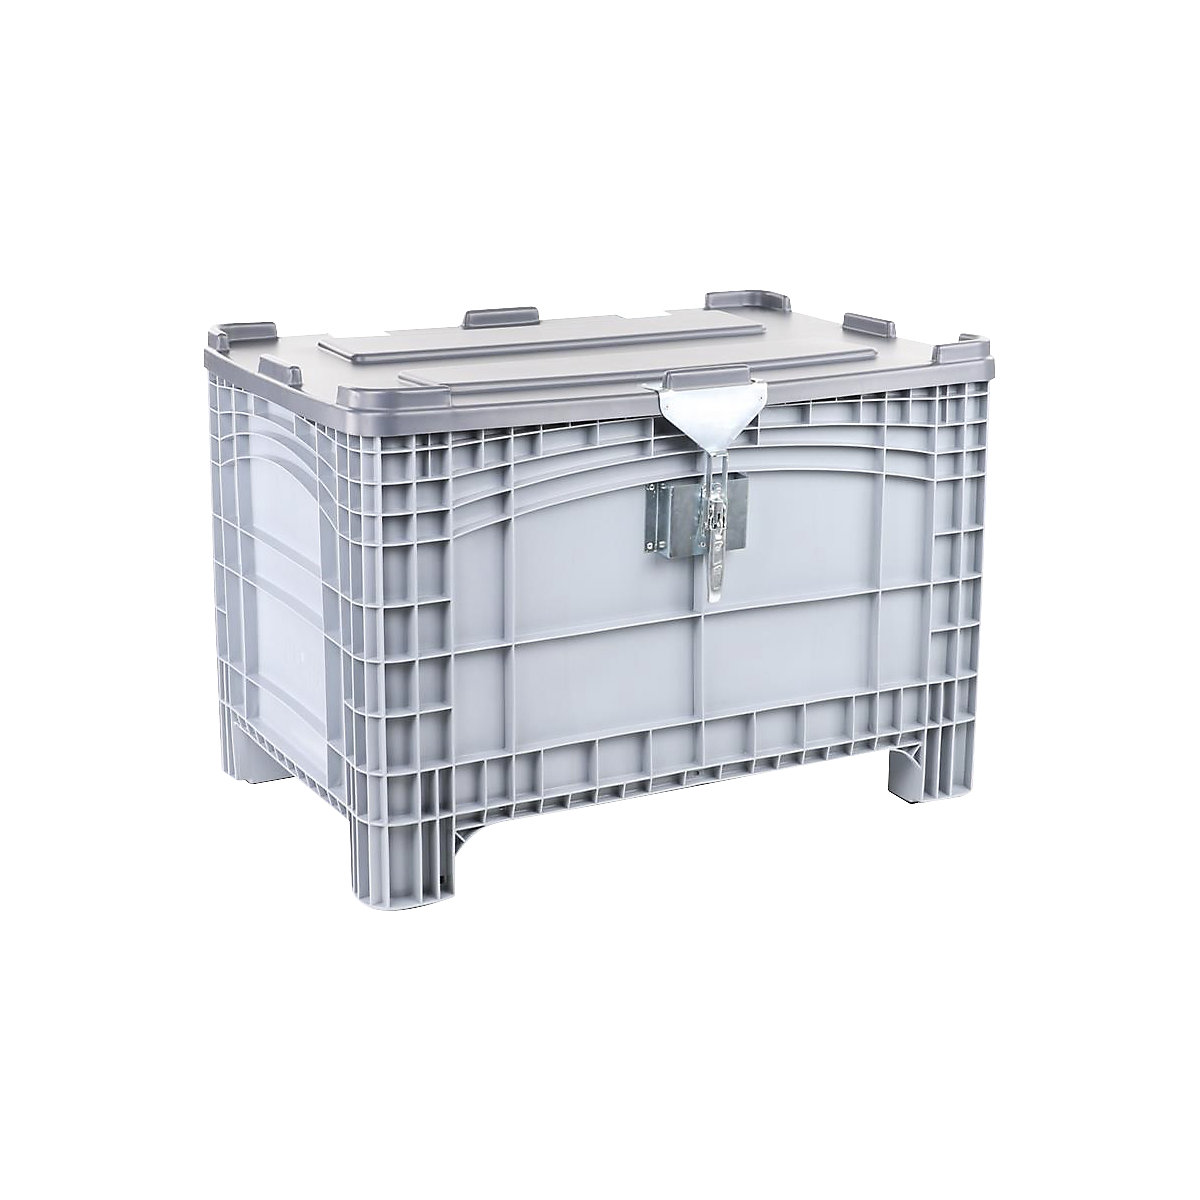 Hinged lid for pallet boxes, lockable